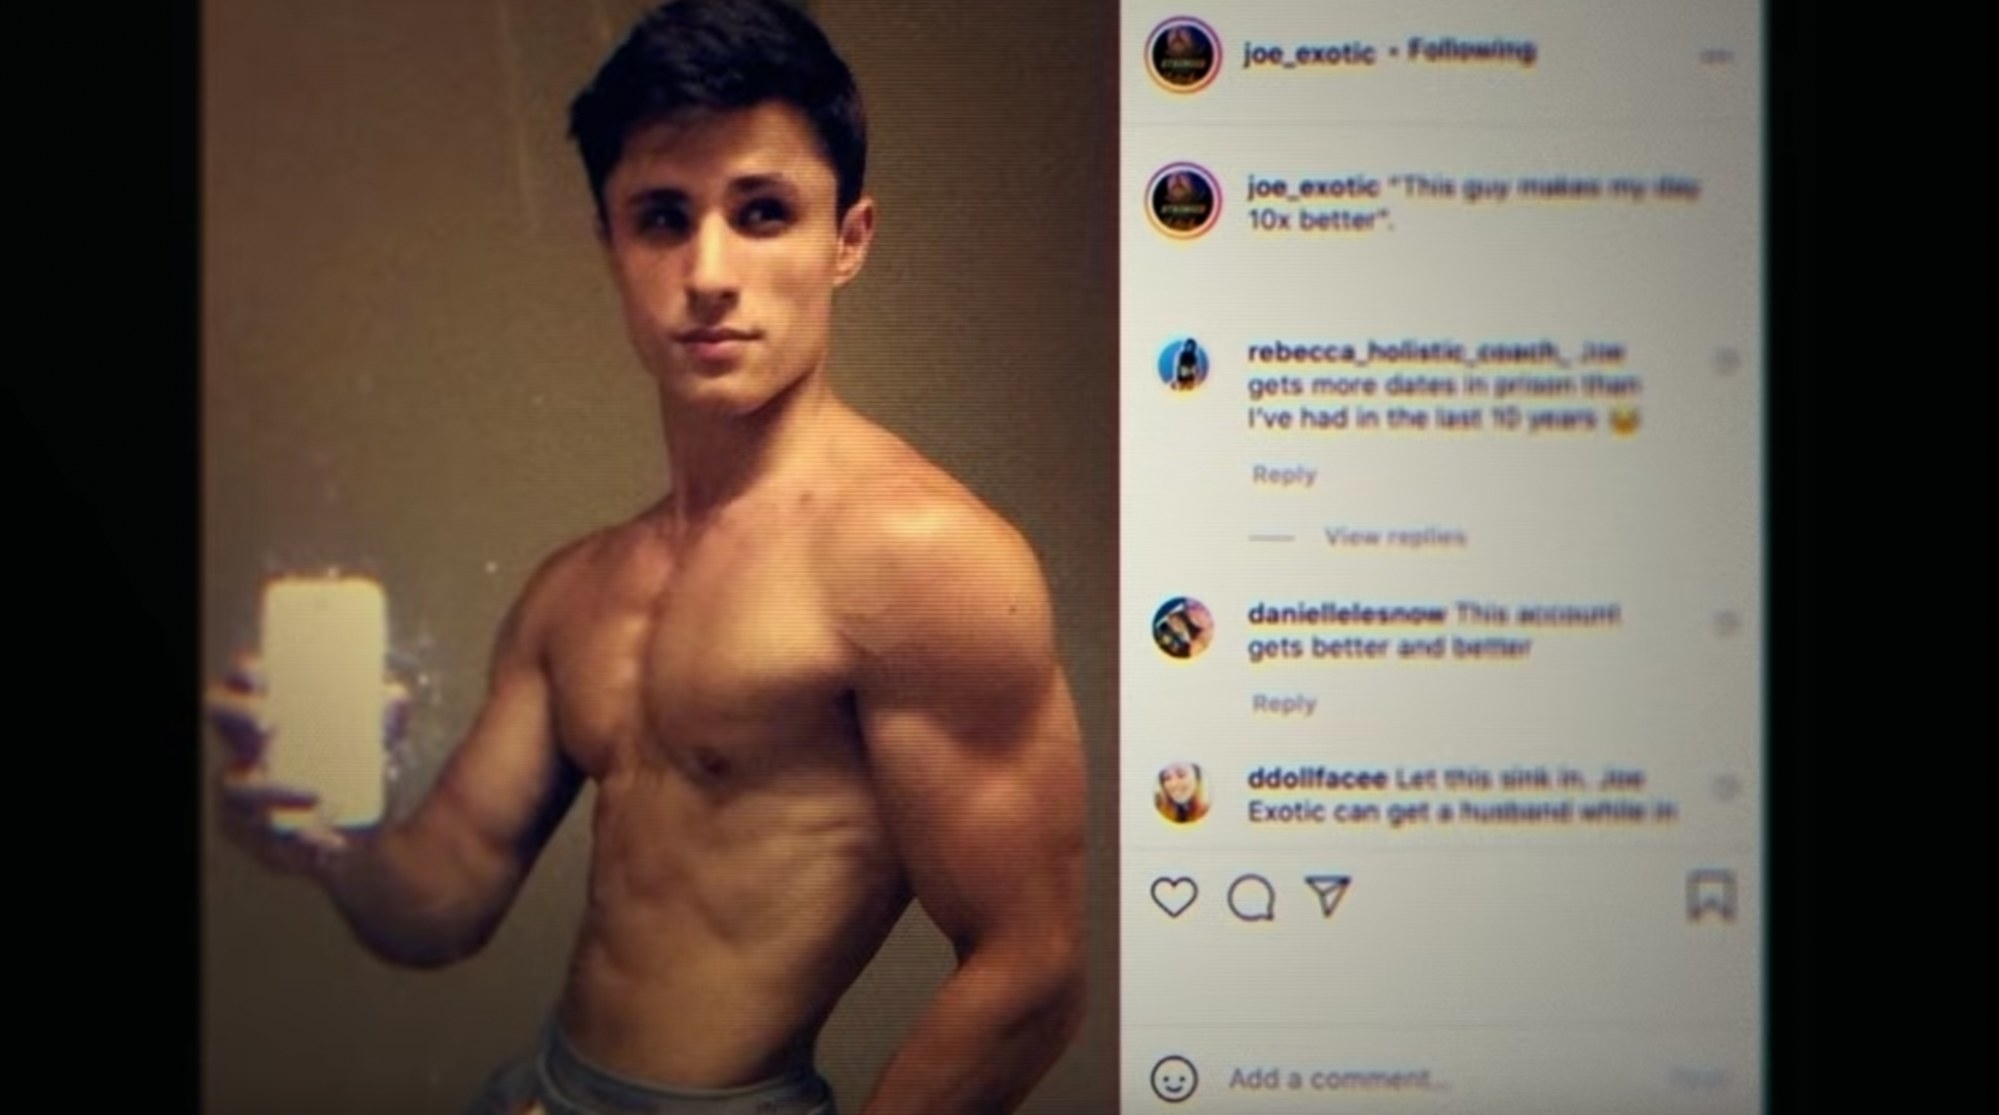 a screenshot from joe exotic&#x27;s instagram – a young muscled man posing for a selfie